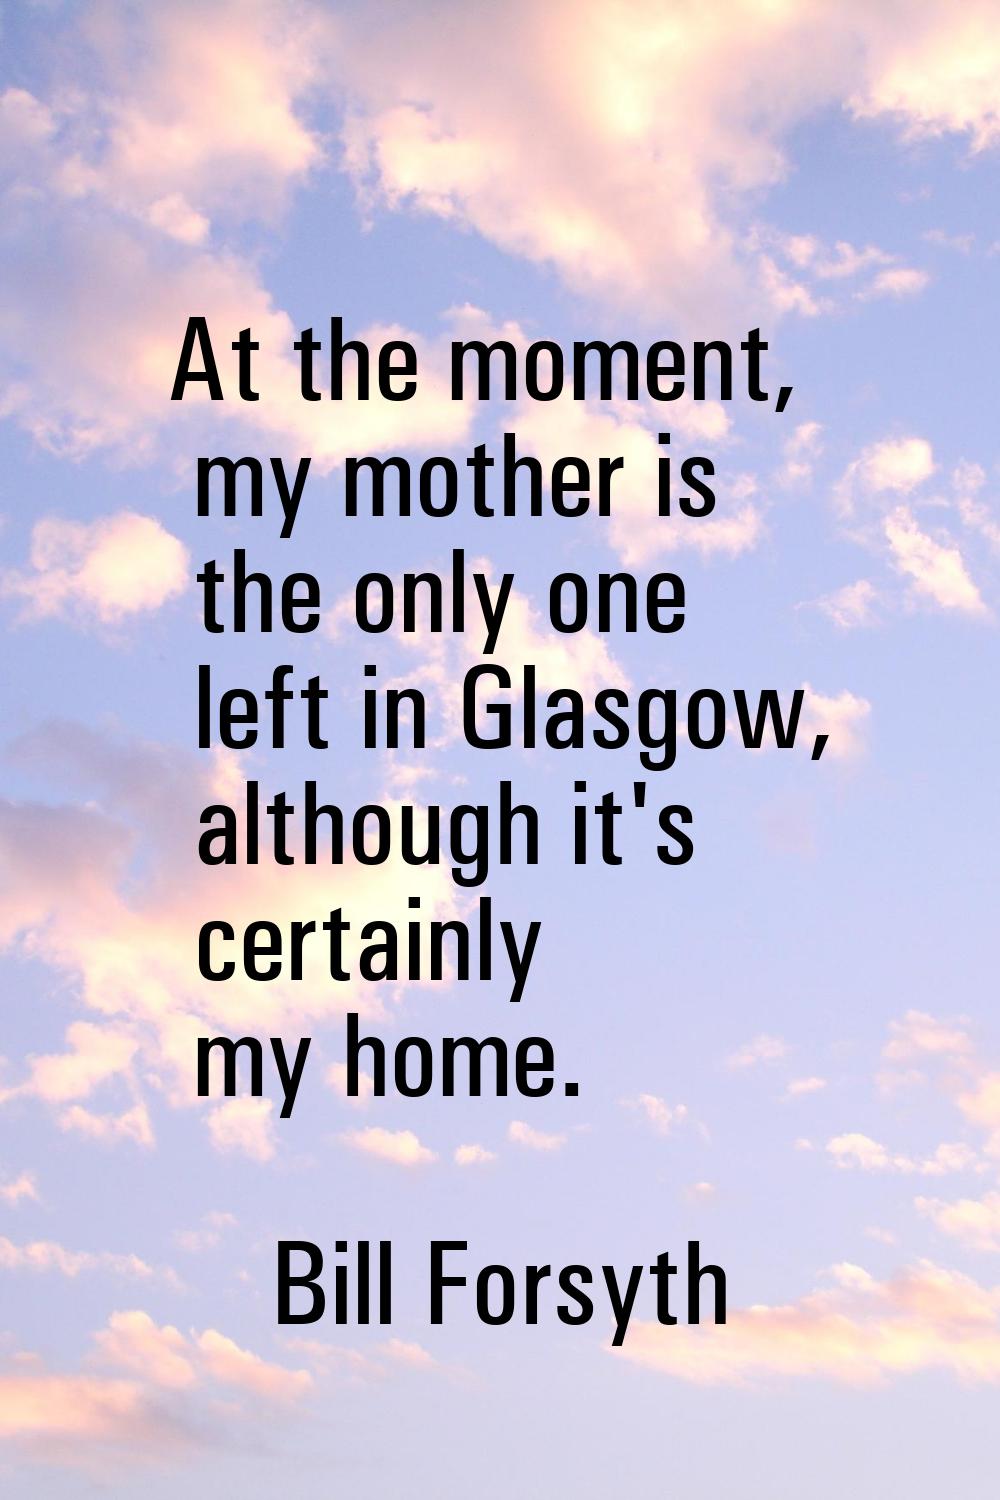 At the moment, my mother is the only one left in Glasgow, although it's certainly my home.